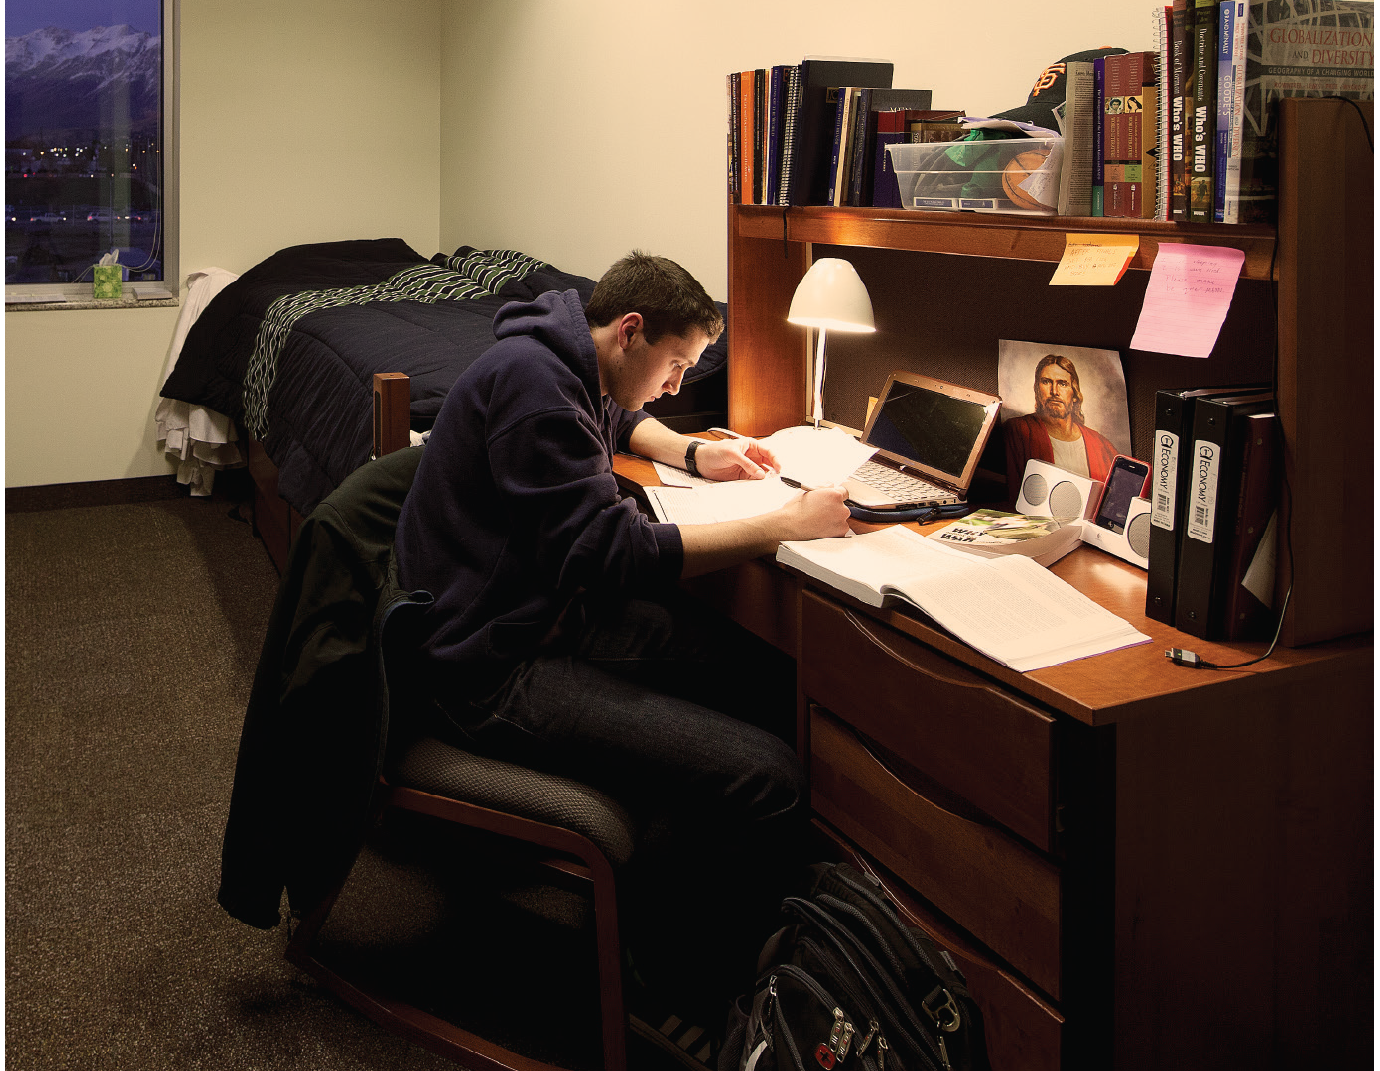 A young man is studying at his desk.